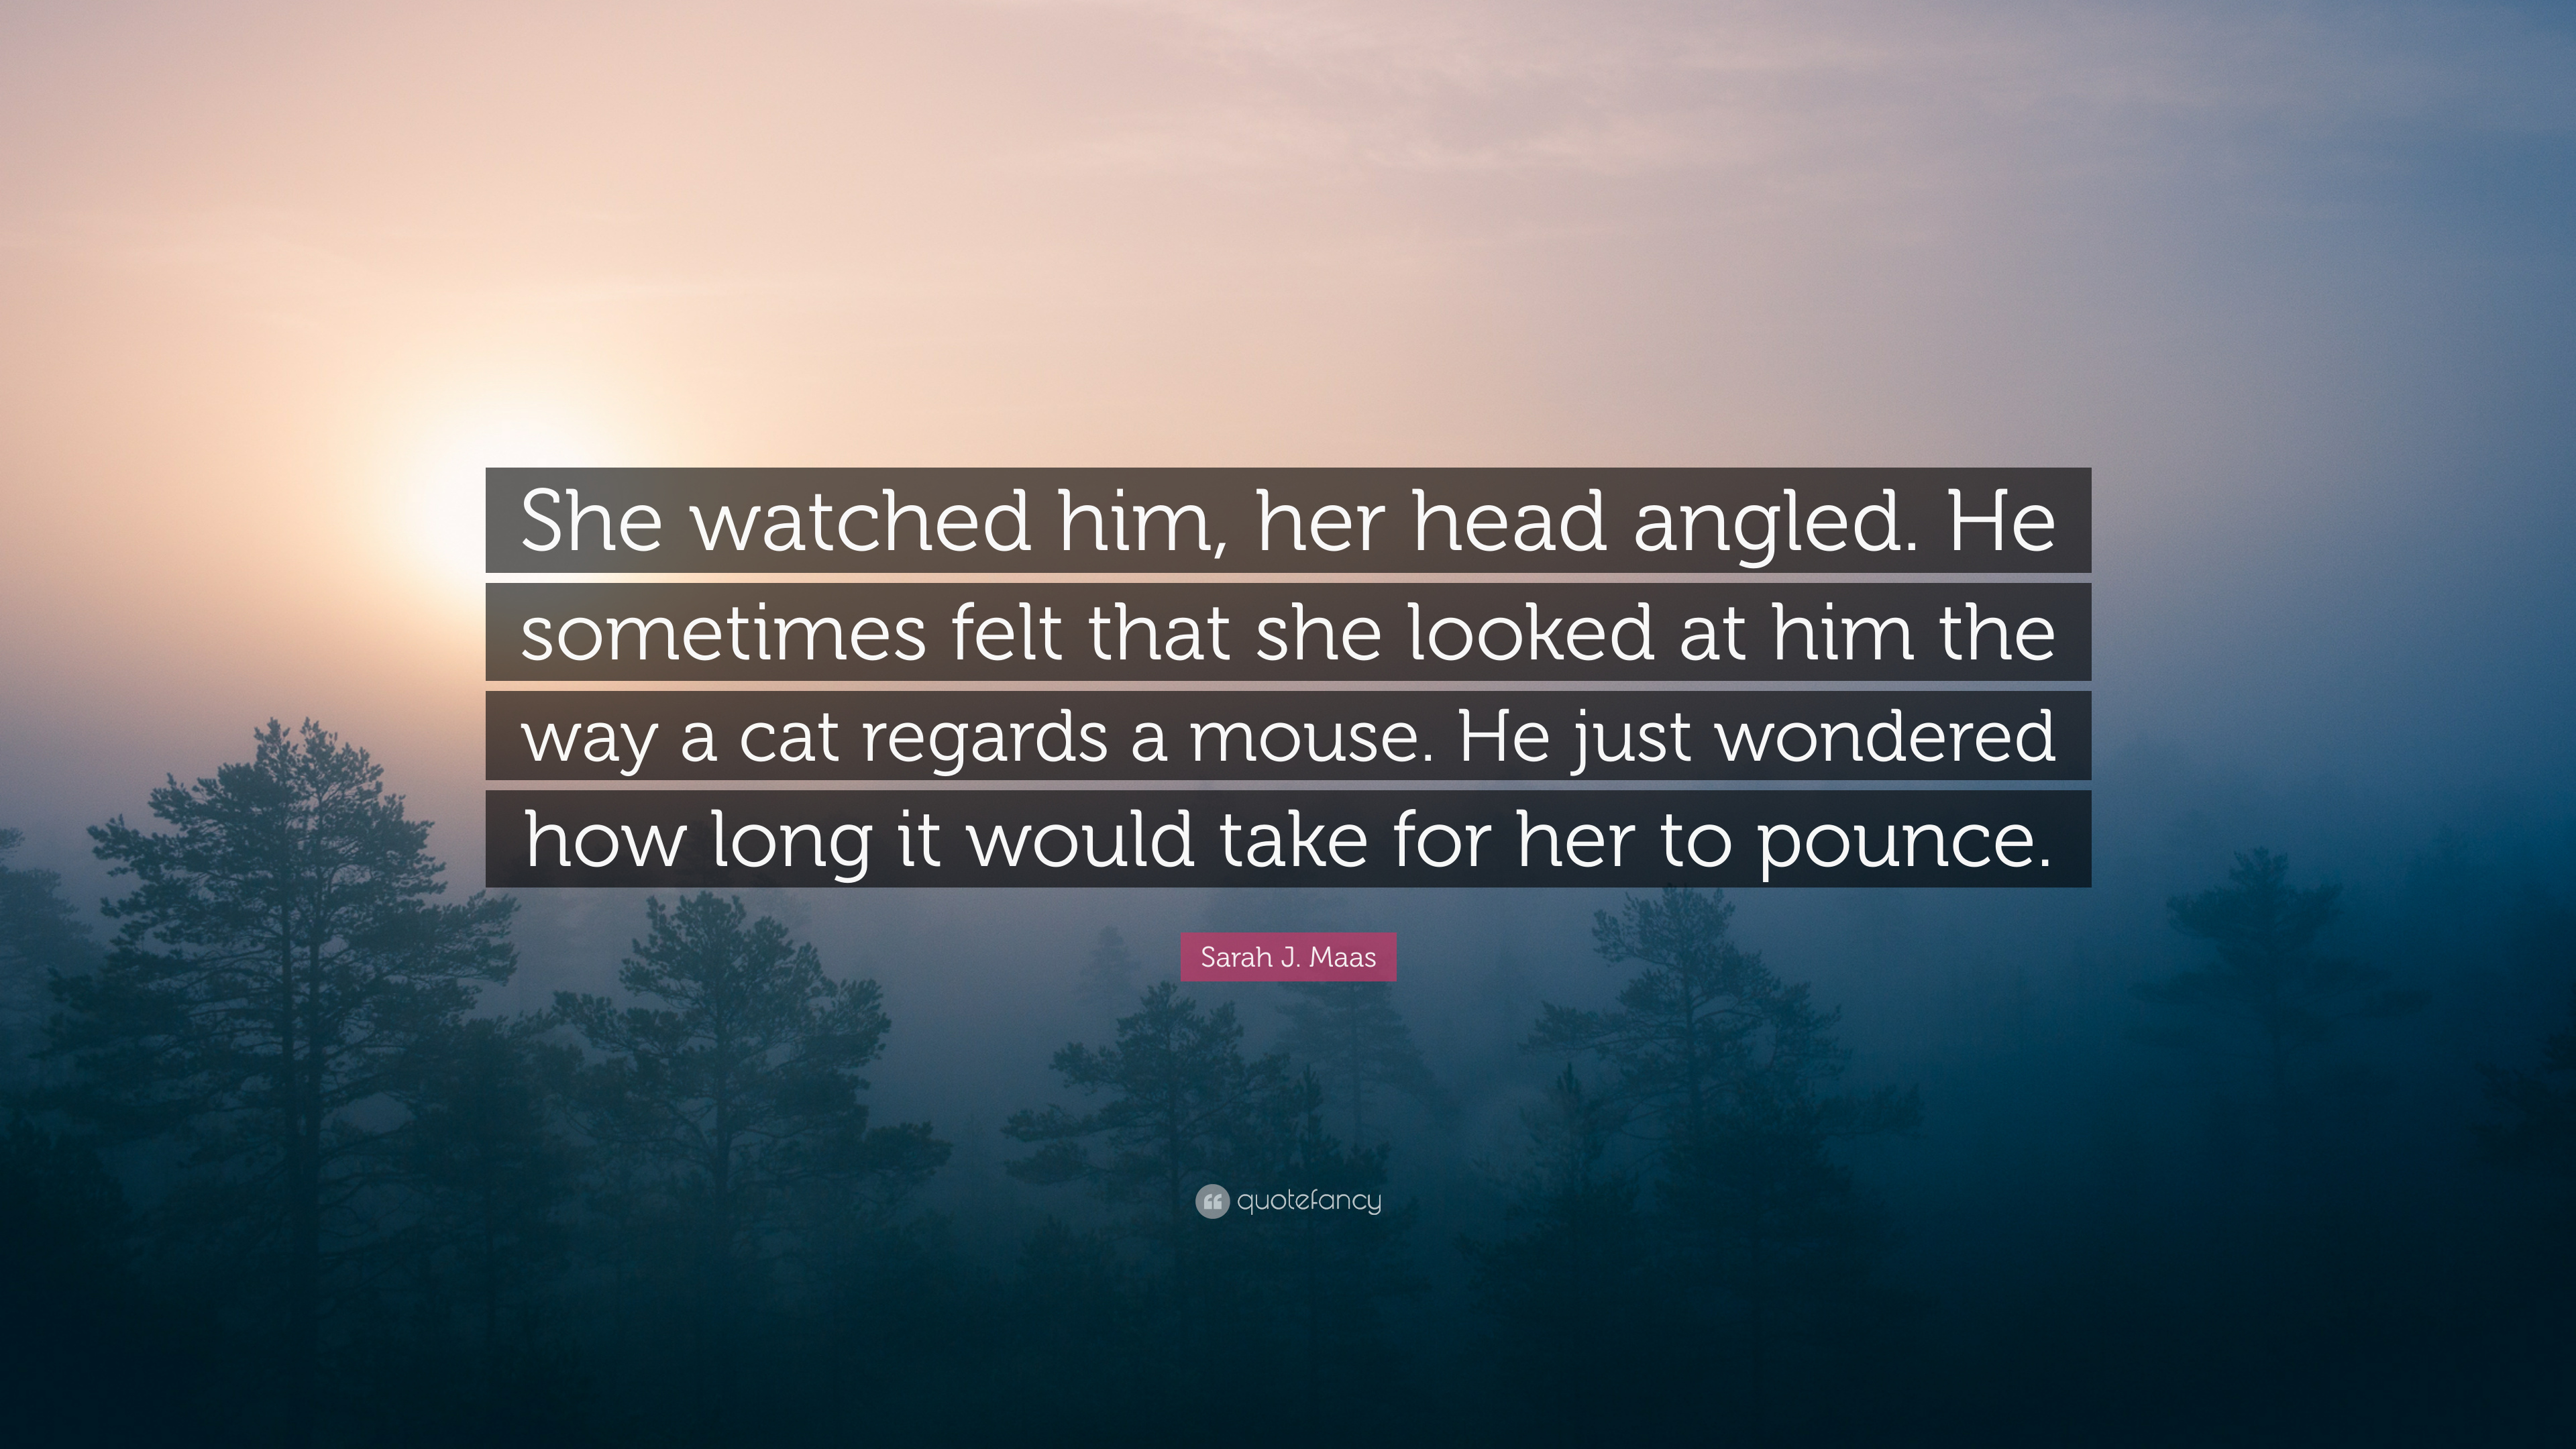 Sarah J. Maas Quote: “She watched him, her head angled. He